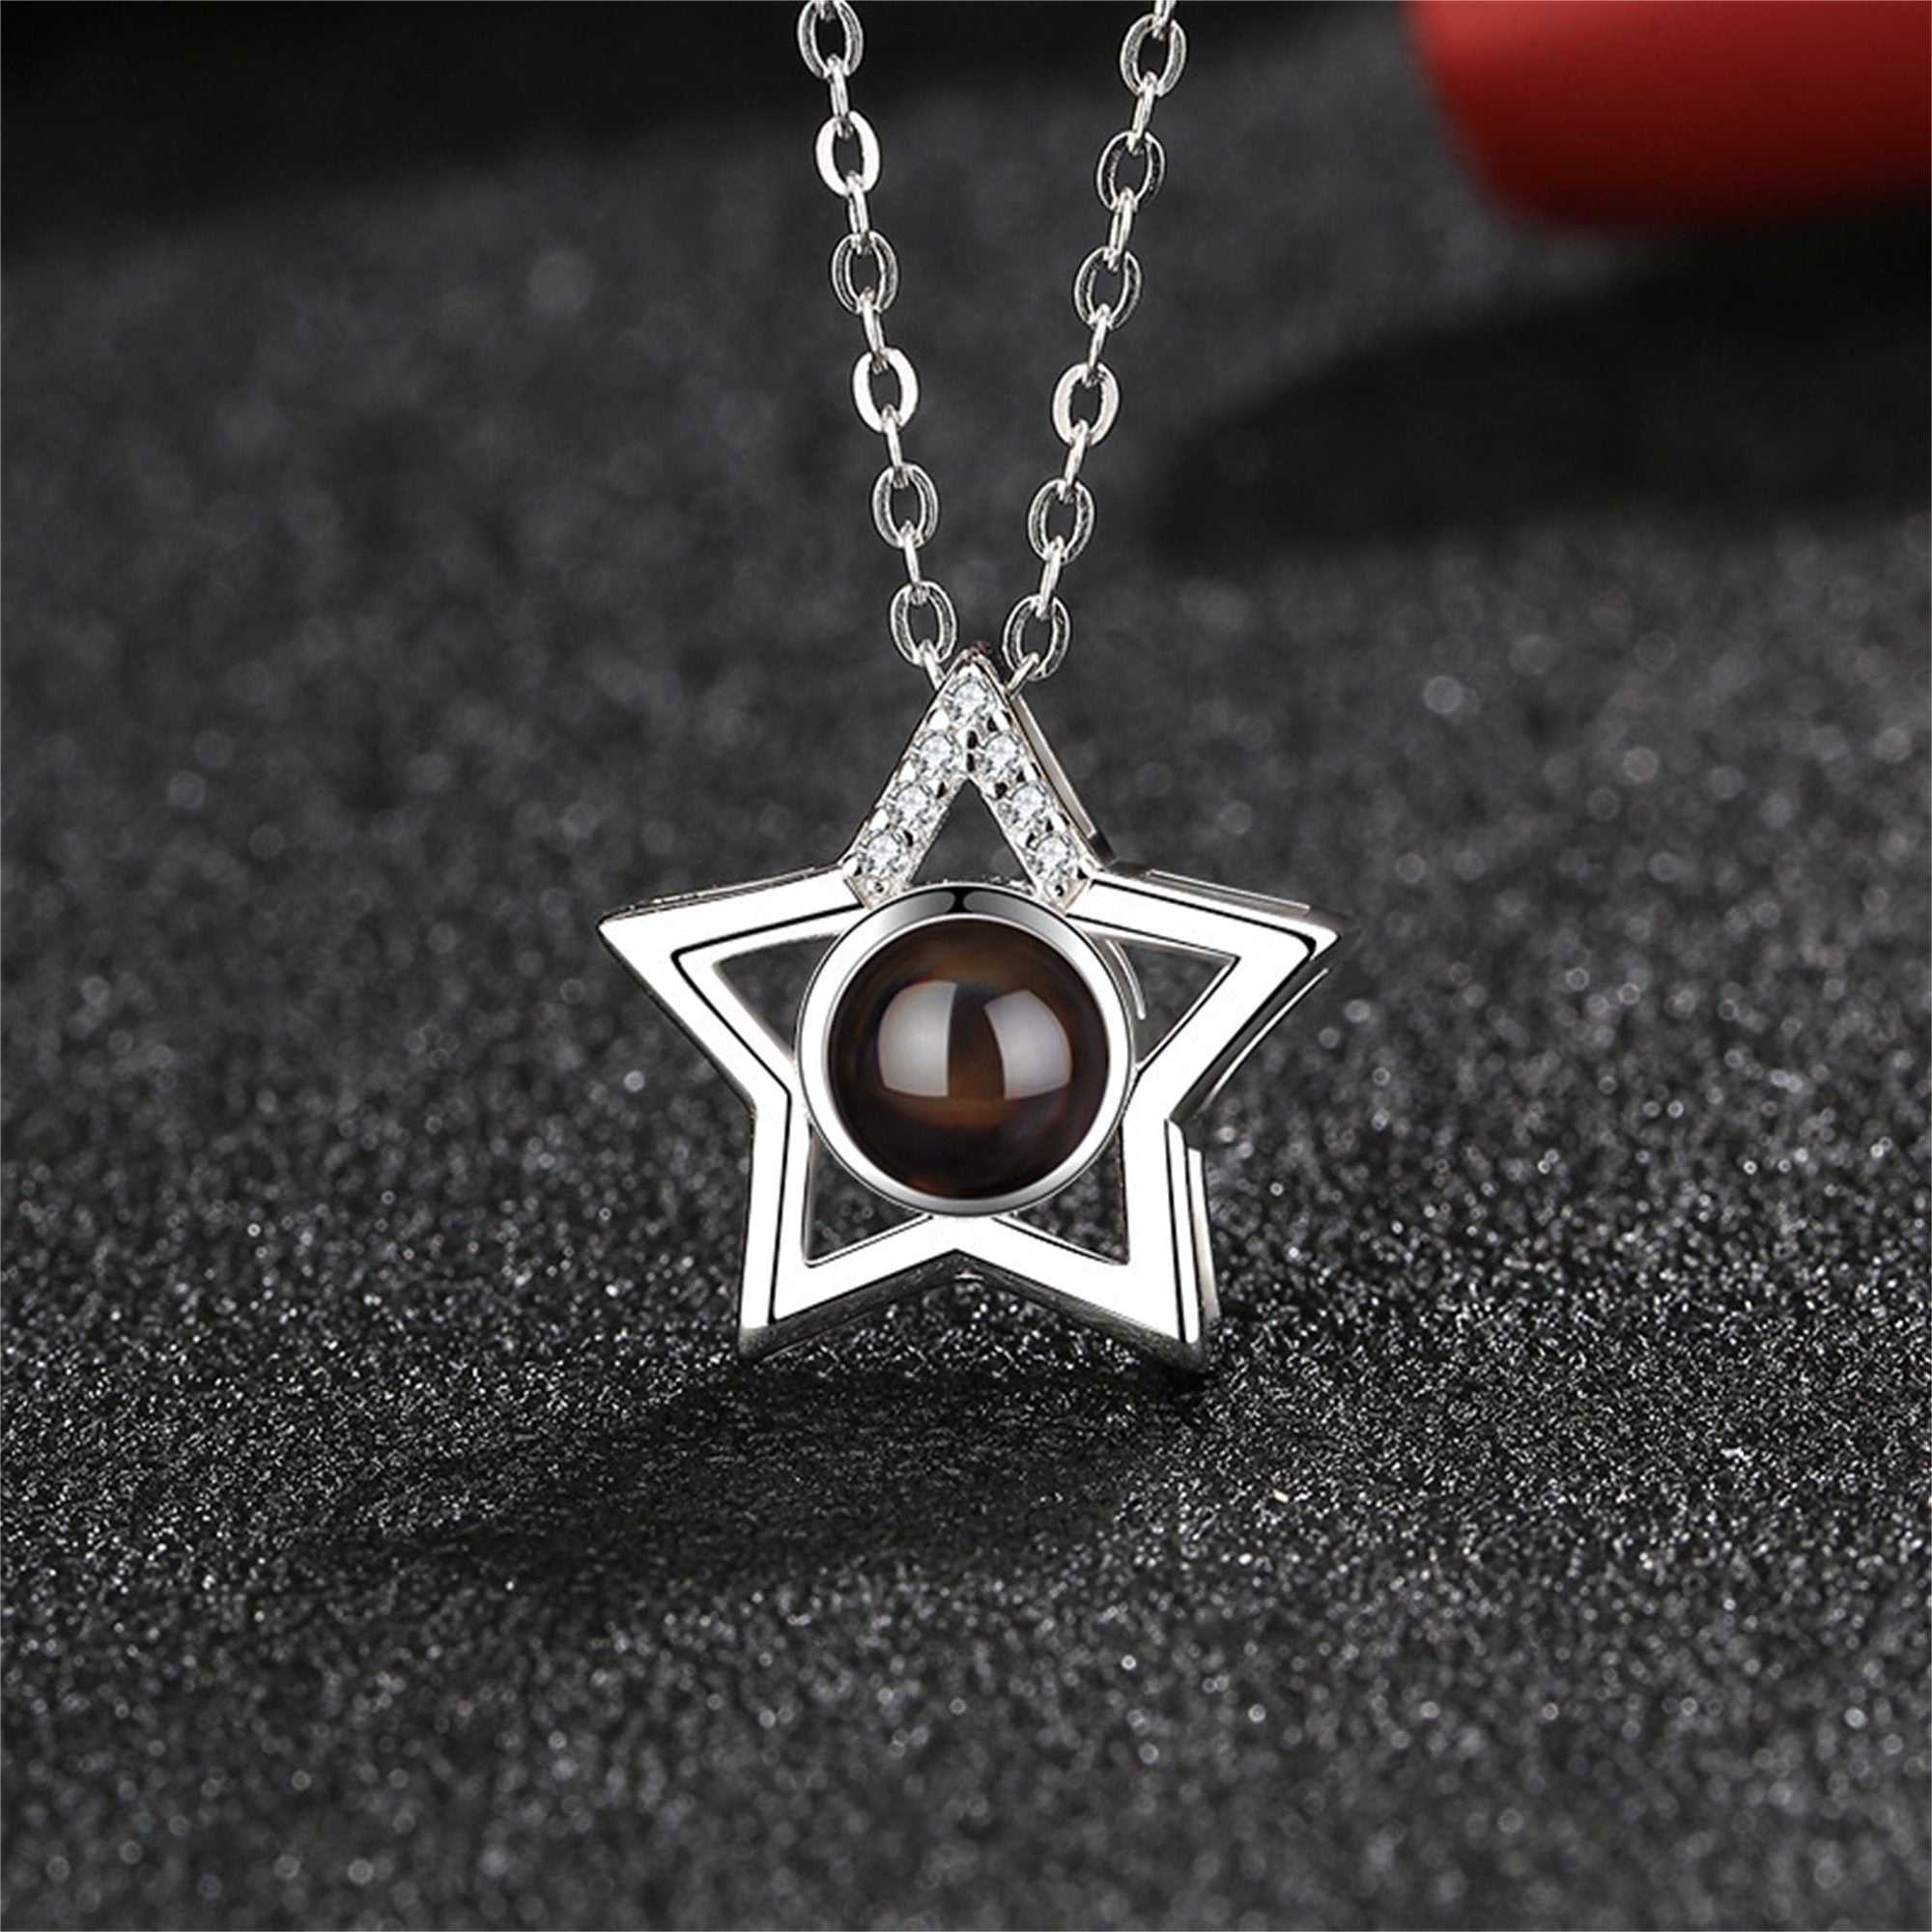 Personalized Star Photo Projection Necklace, Custom Picture Pendant Jewelry